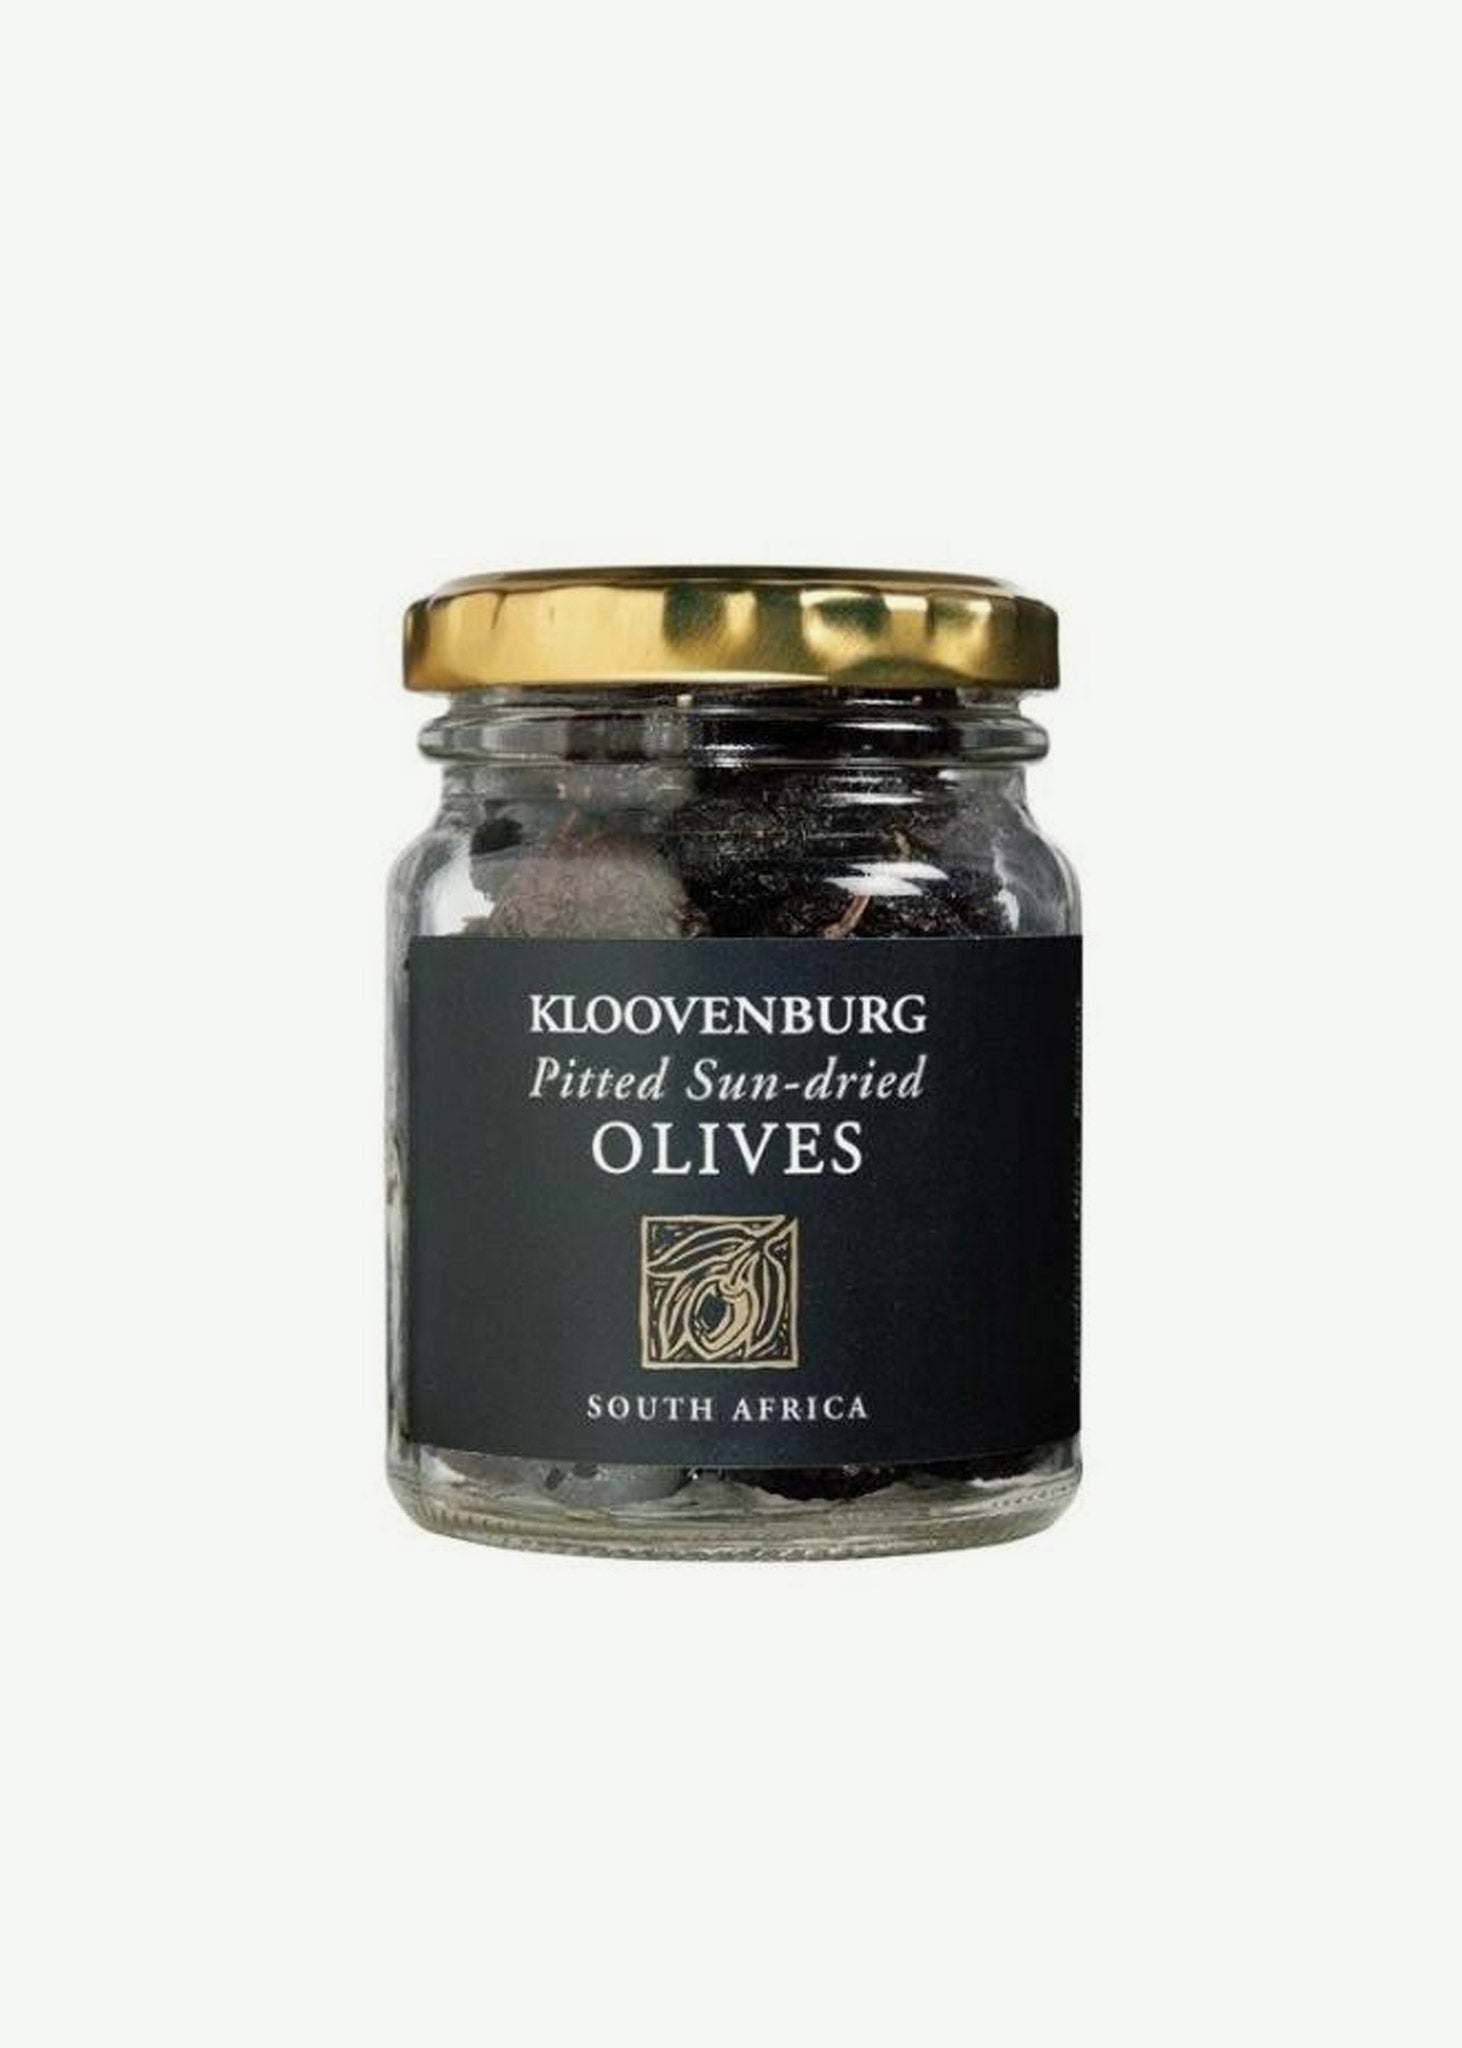 Kloovenburg Pitted Sun-dried Olives 75g